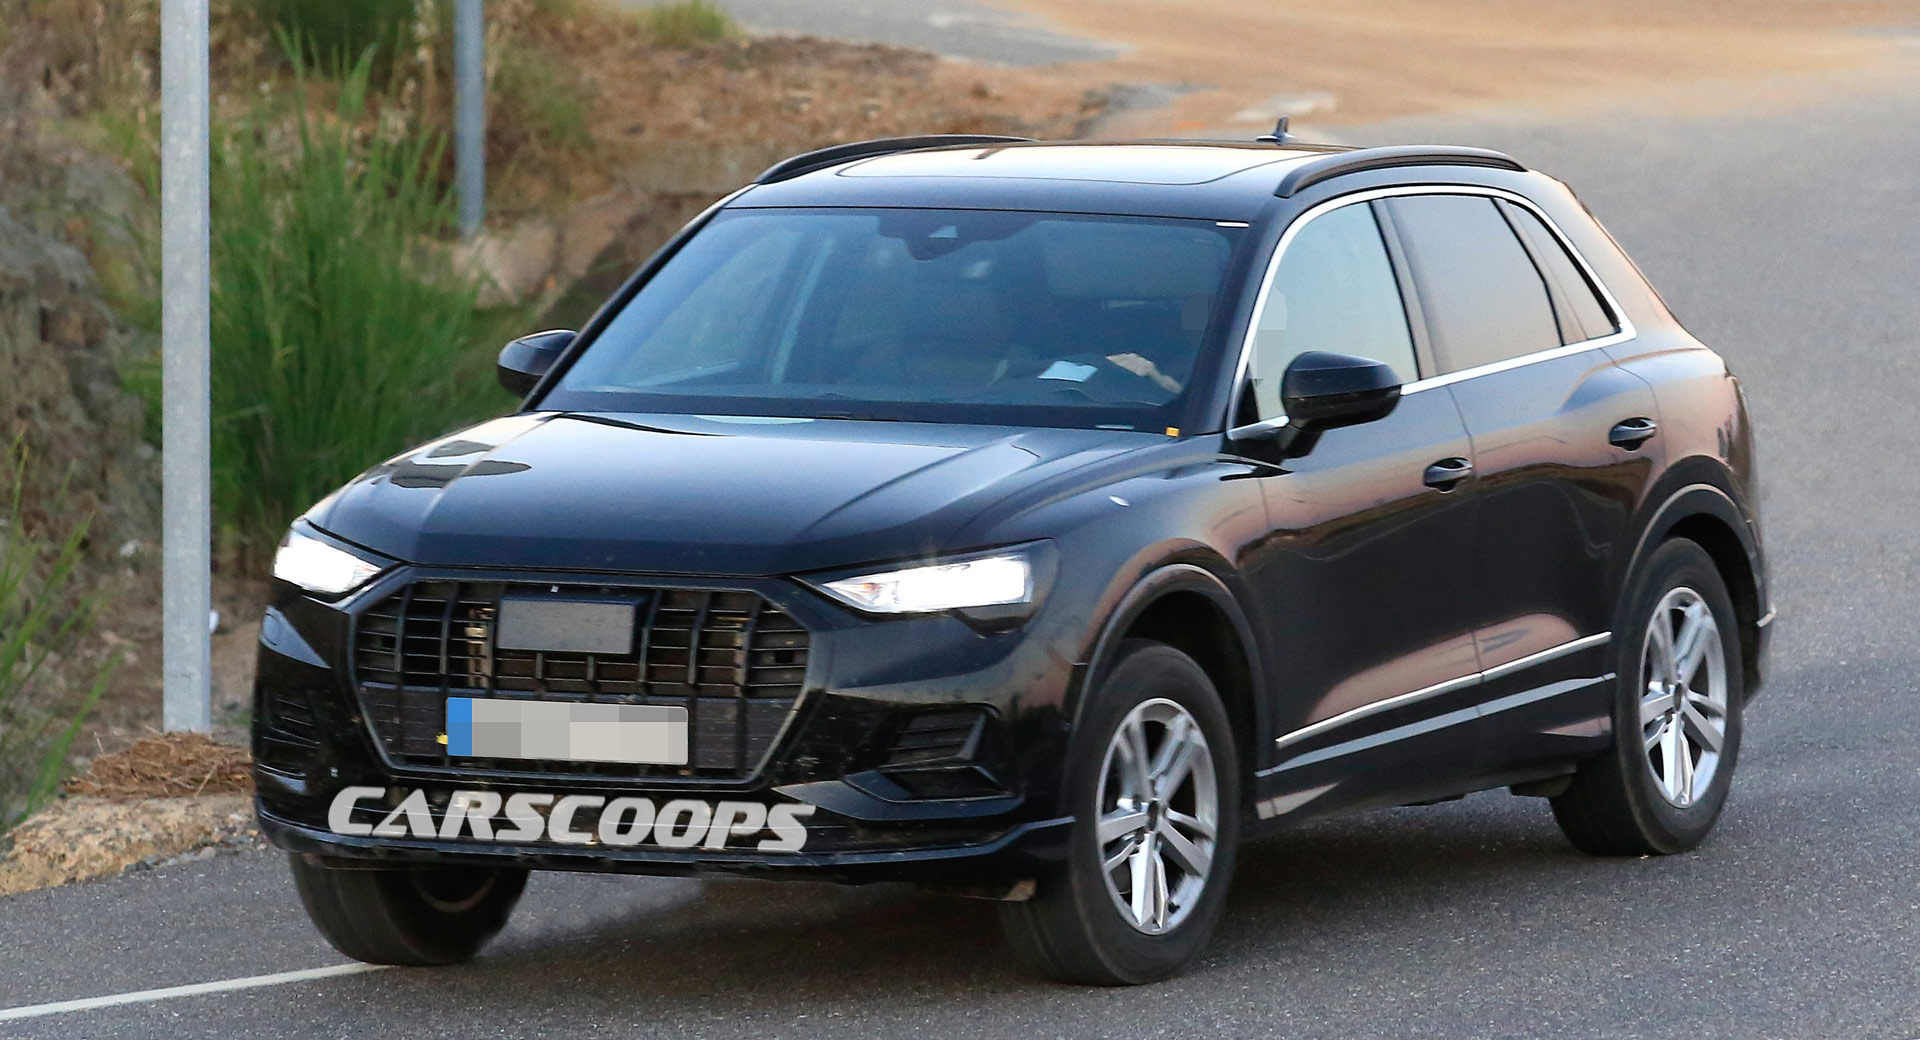 2019 Audi Q3 Looks About Ready To Renew Its Assault On Its Luxury